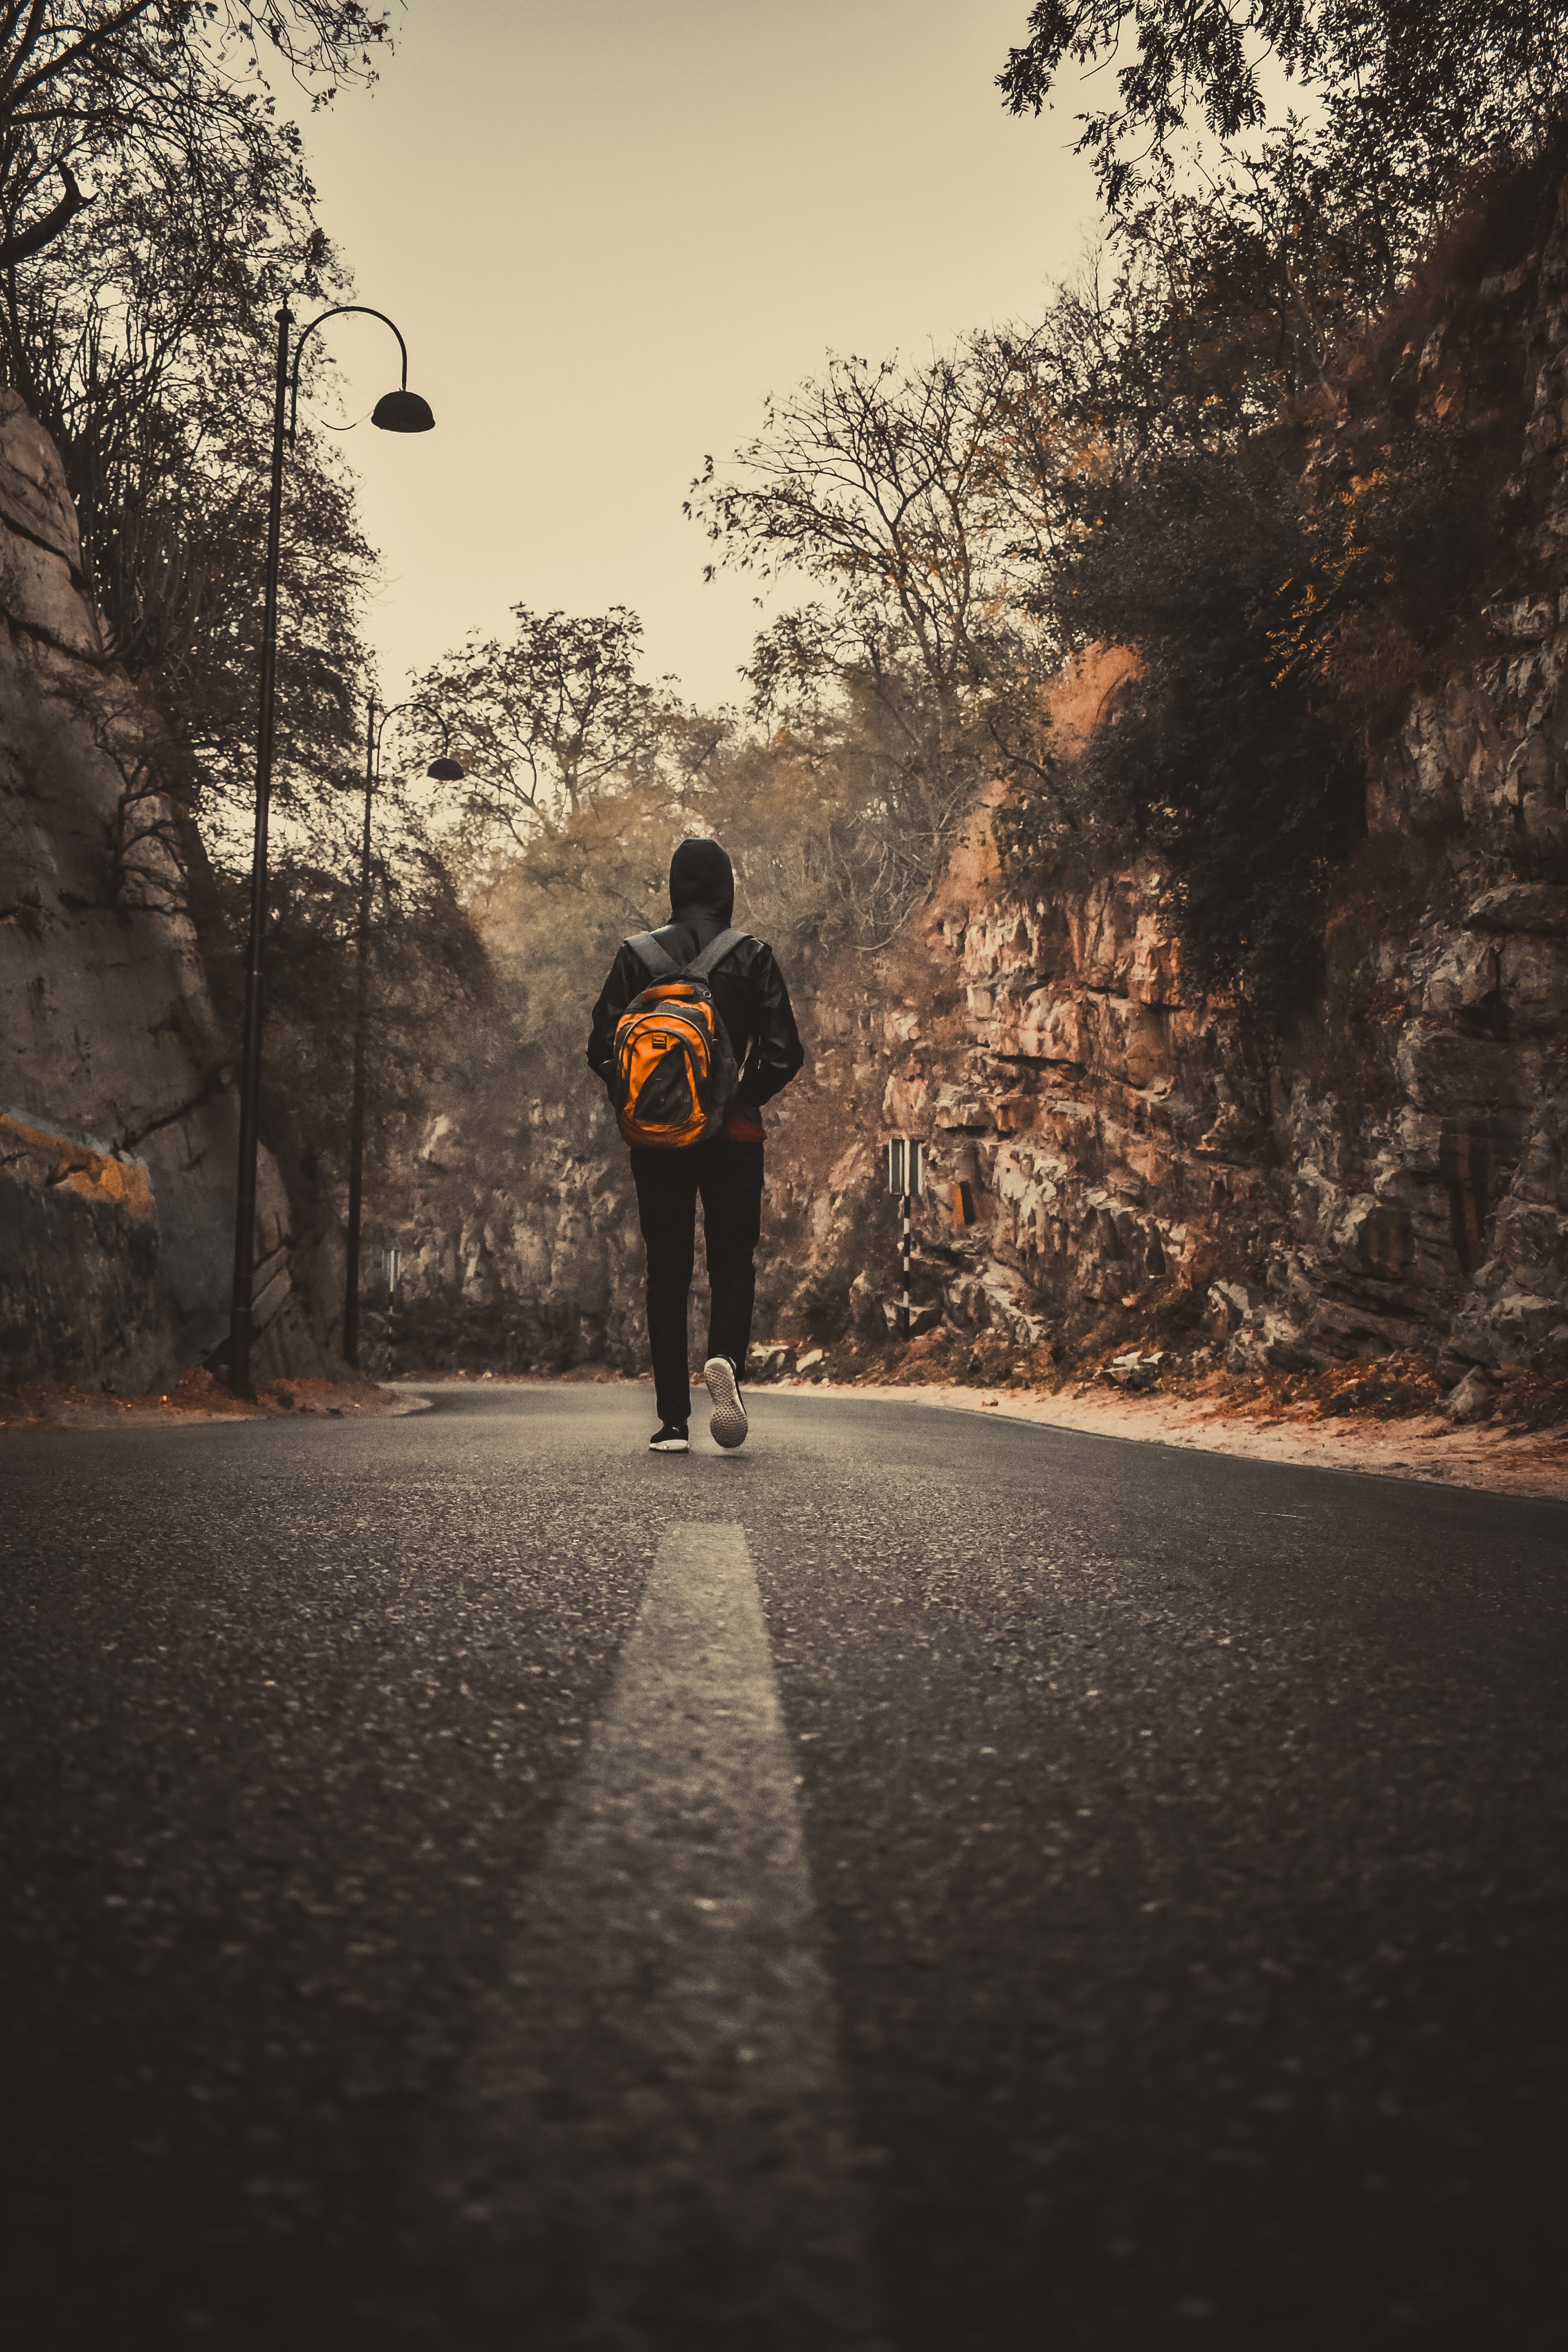 android sadness, alone, miscellanea, miscellaneous, road, loneliness, lonely, backpack, rucksack, sorrow